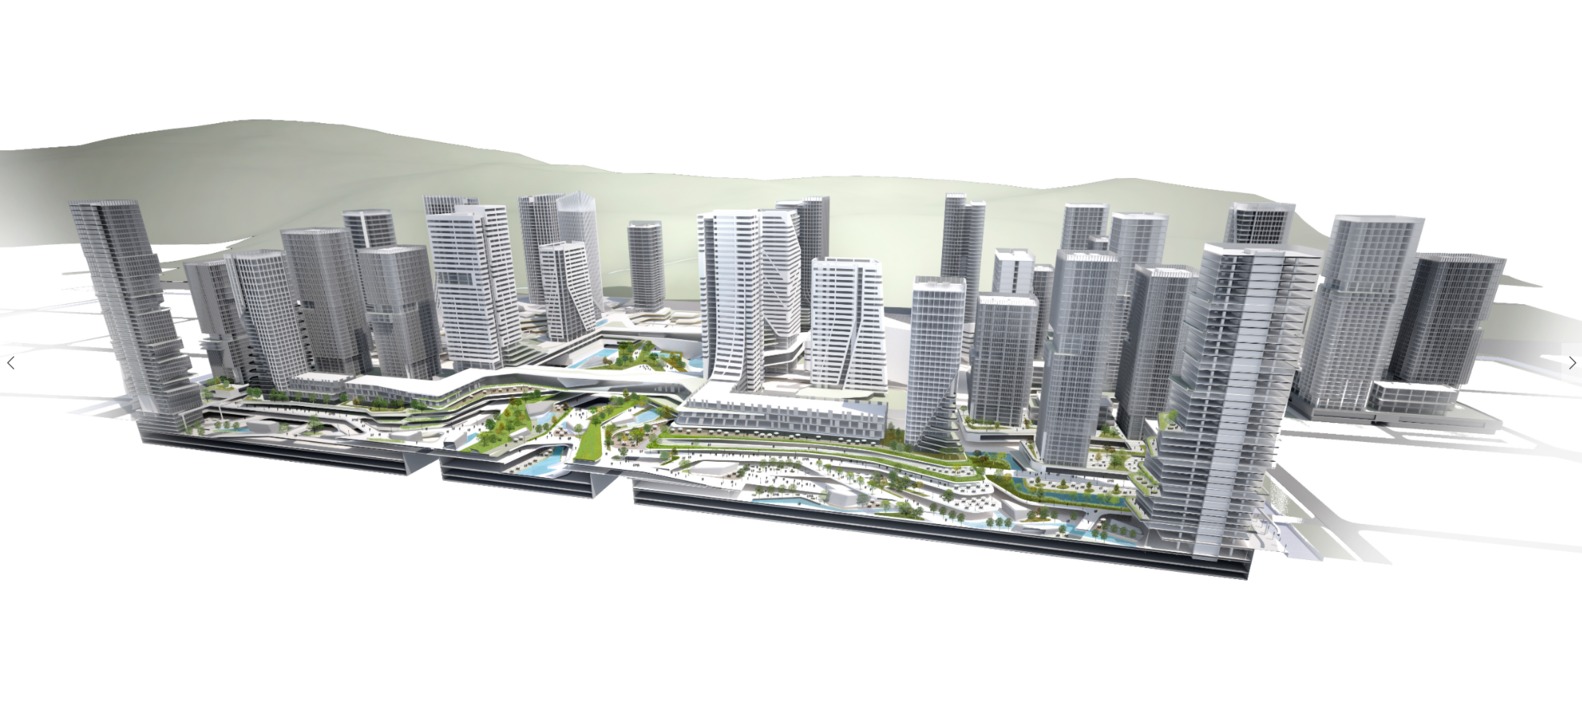 Model of the exterior design of the Hengqin Vientiane World International Commercial Complex